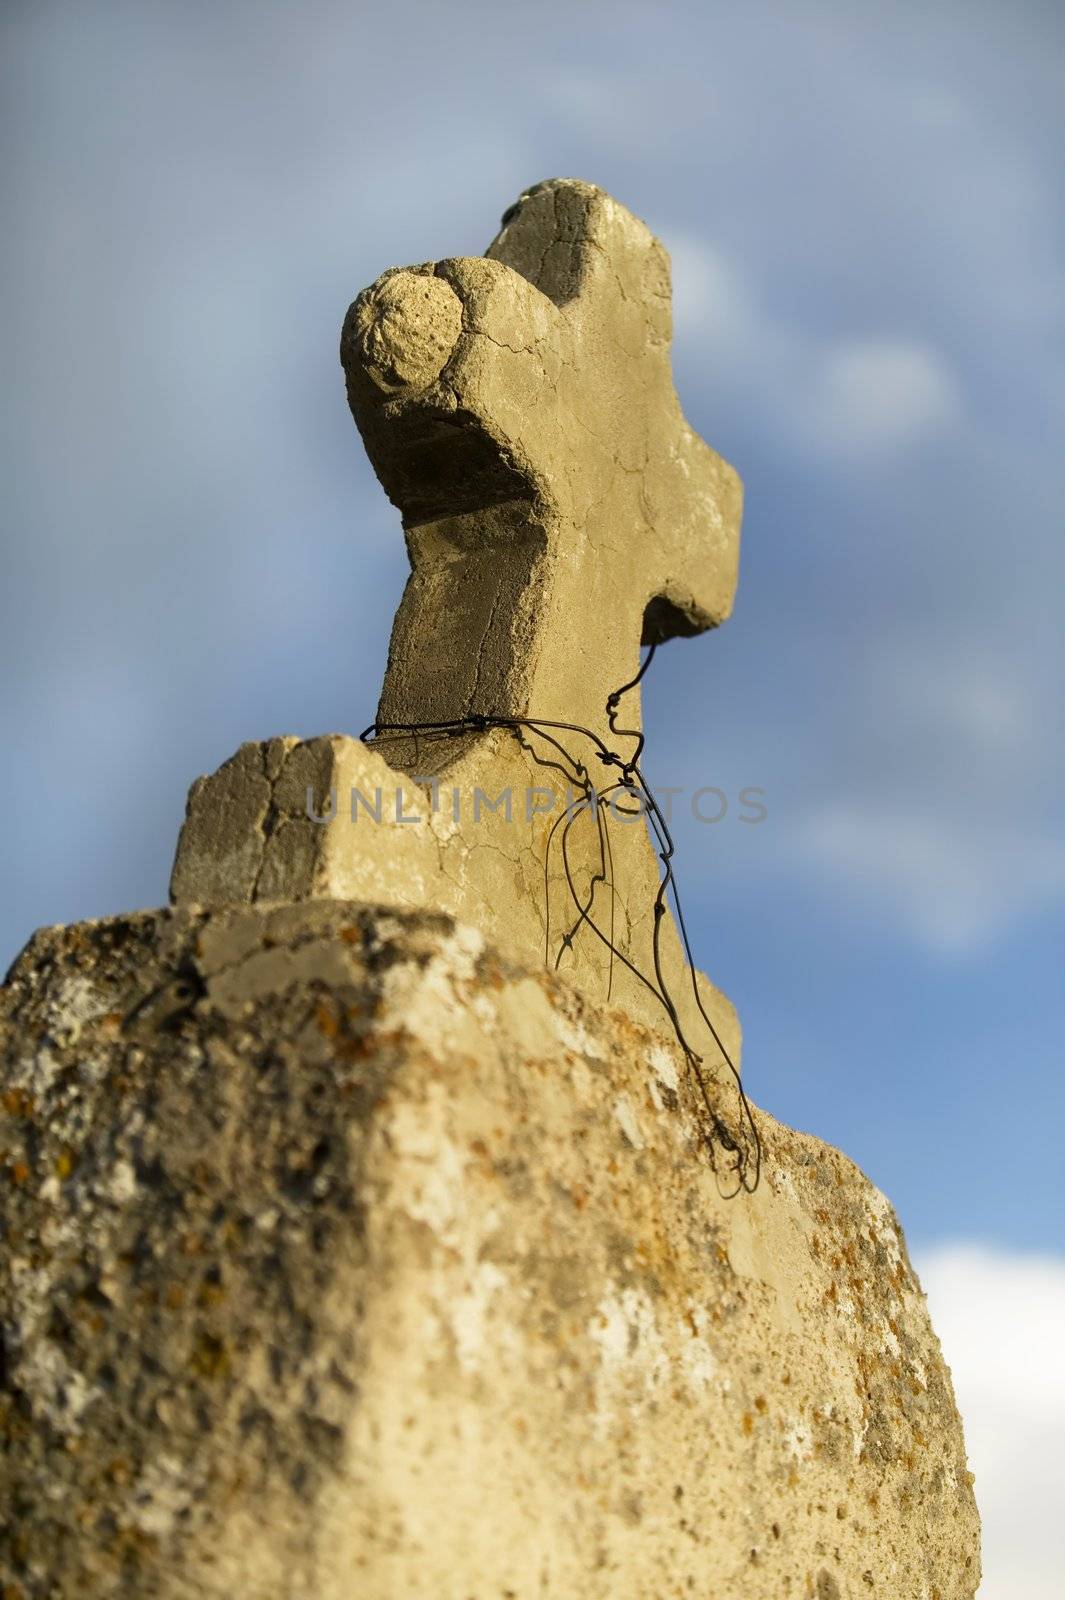 Rustic concrete cross on a cemetary marker